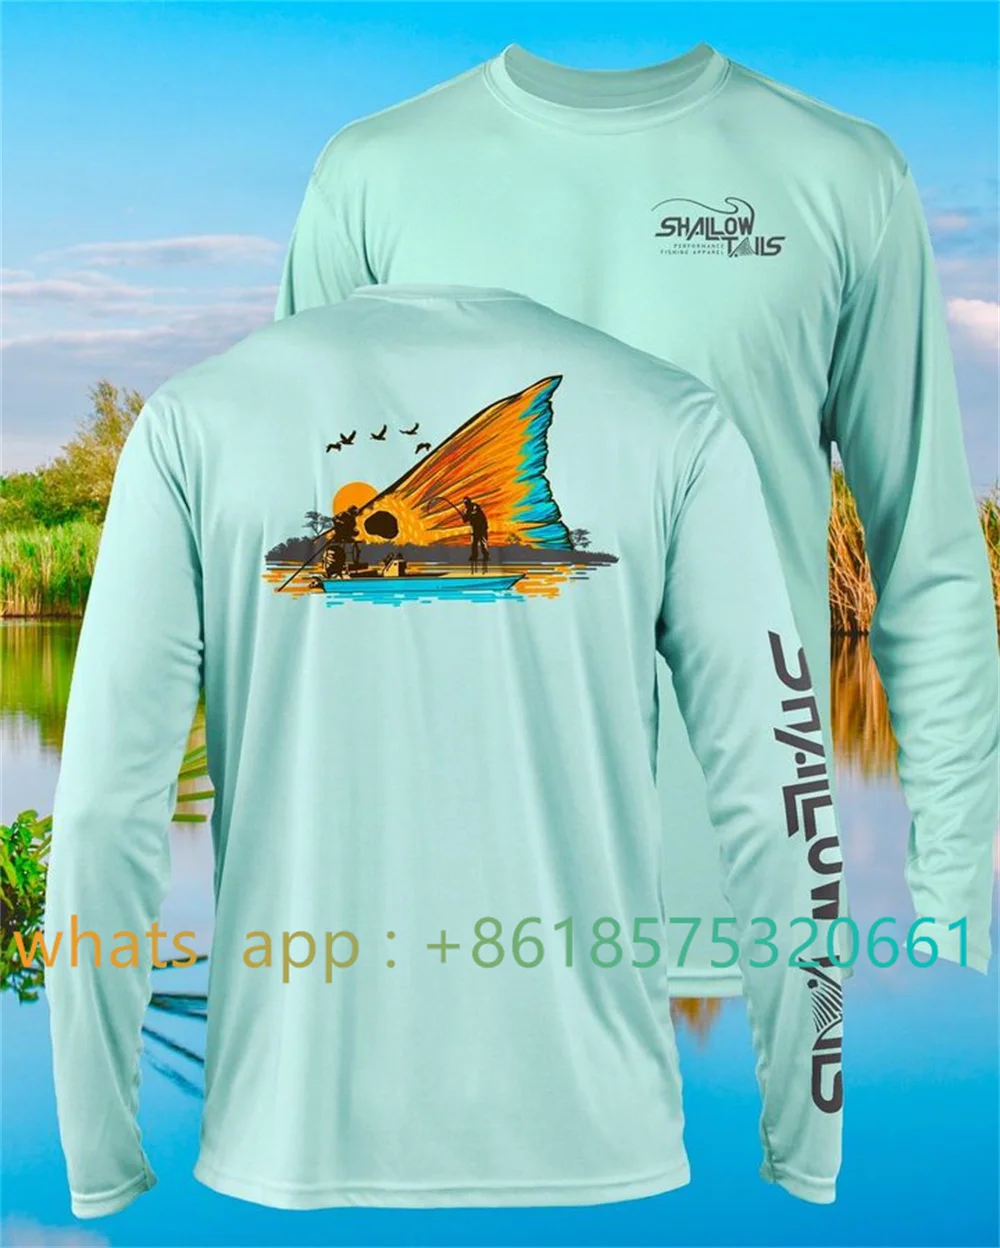 Children's Performance Shirt Breathable Fishing T-Shirt Outdoor